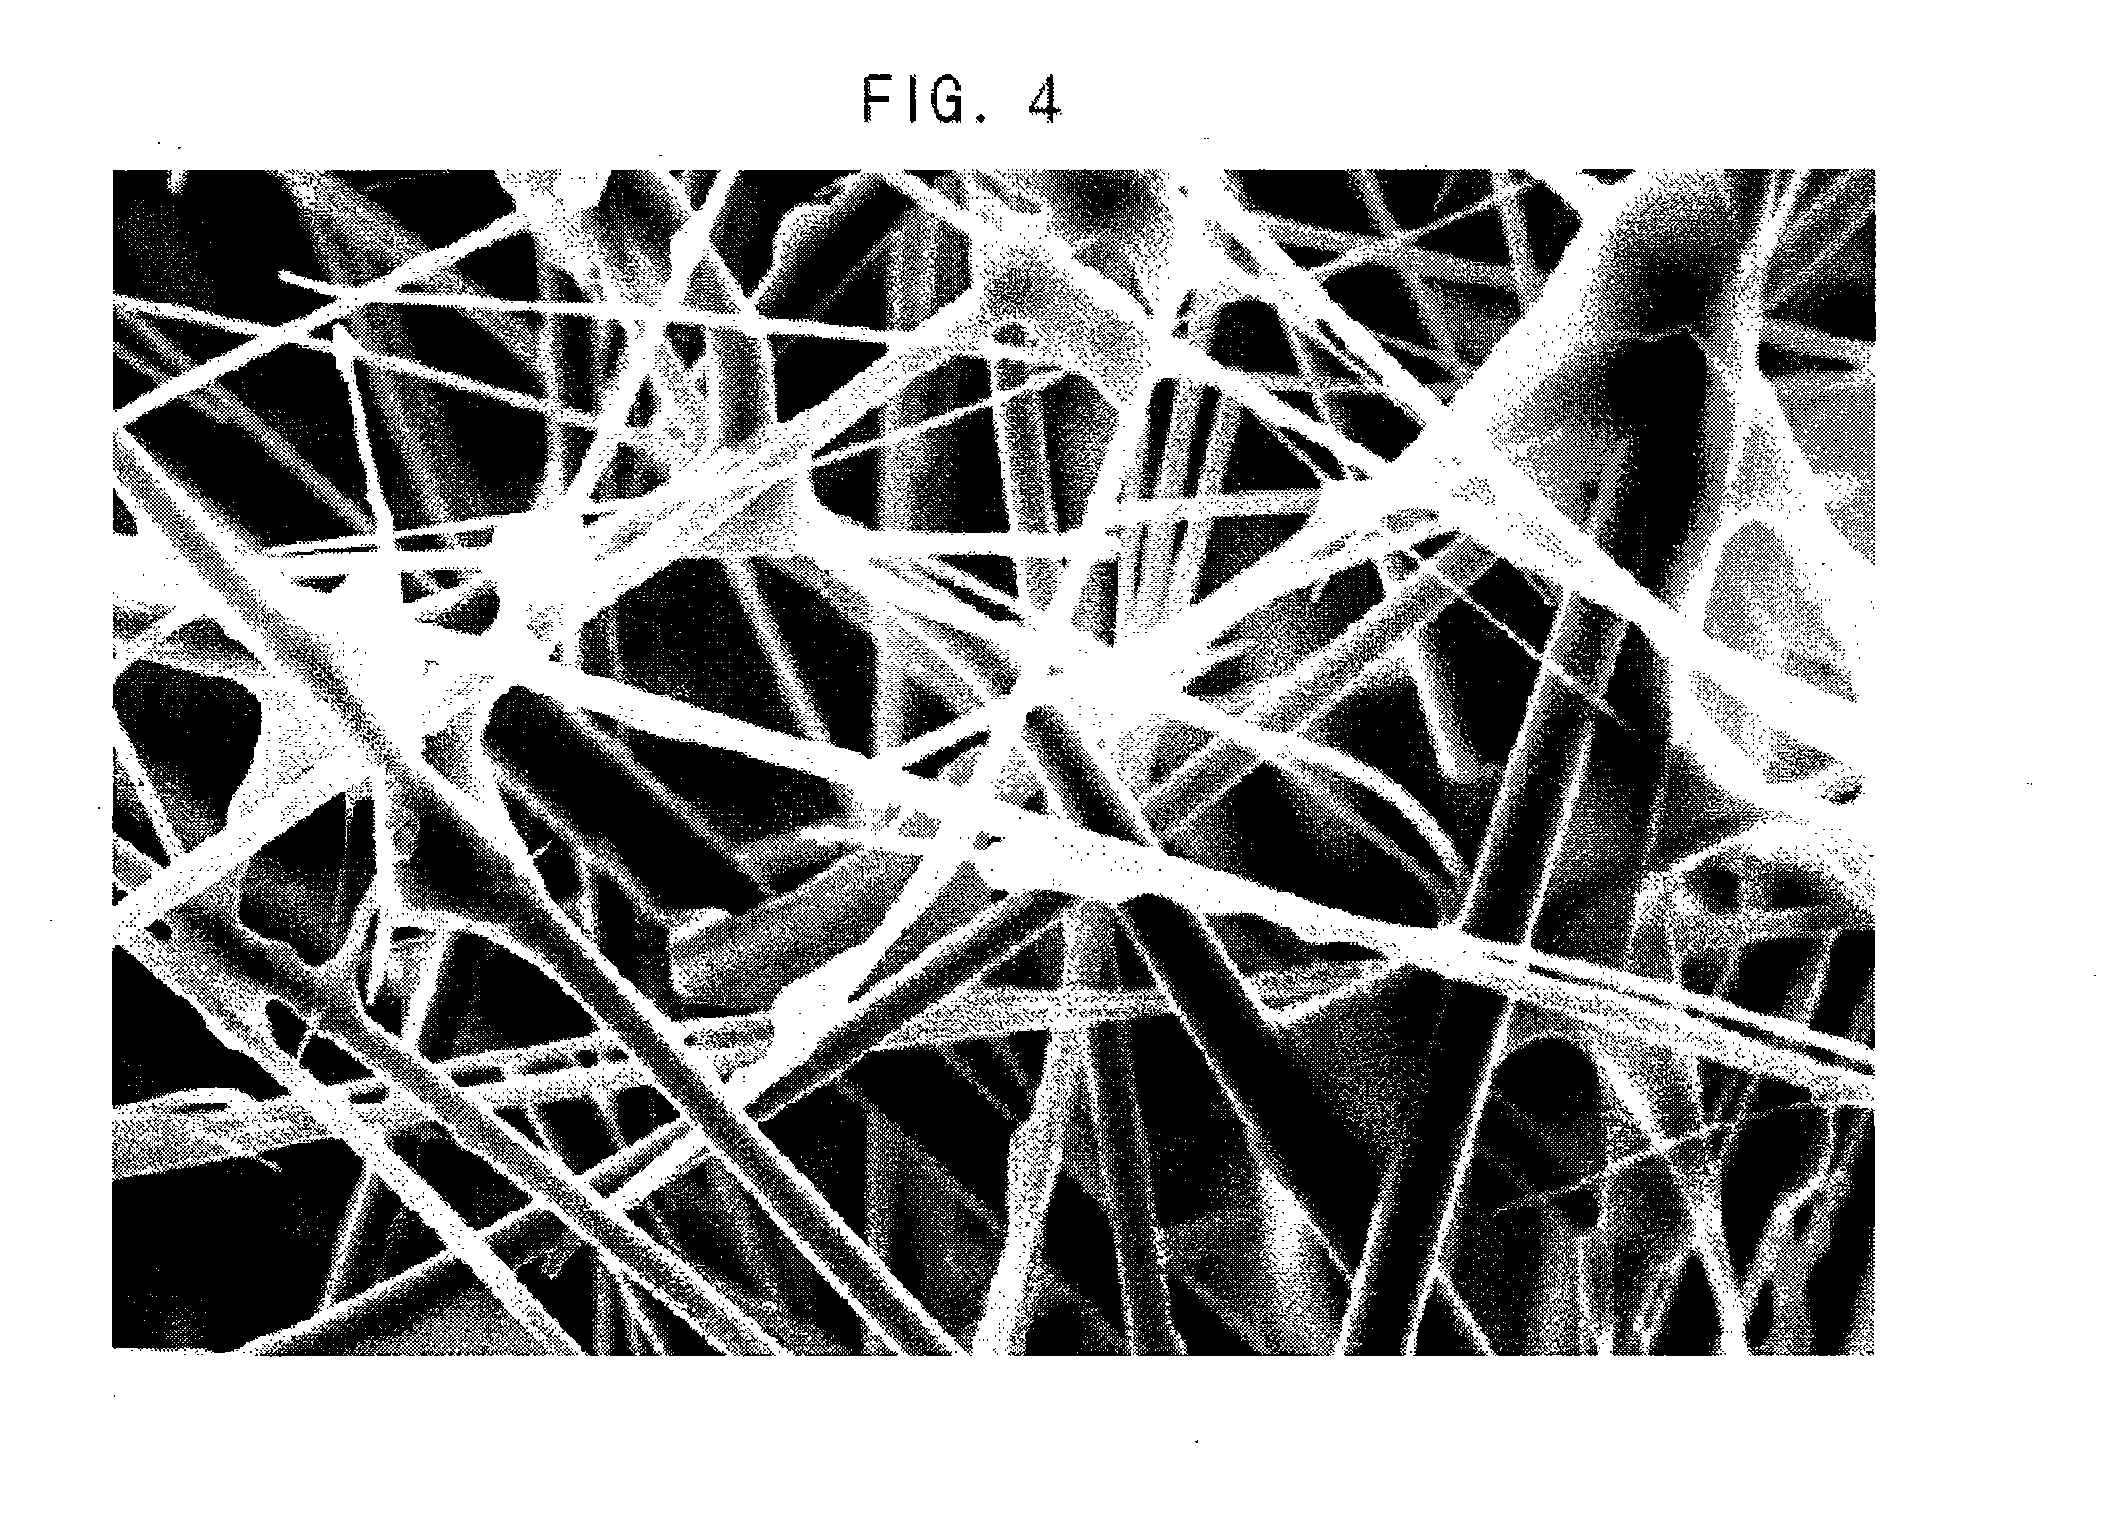 Composite electrode and method for manufacturing the same